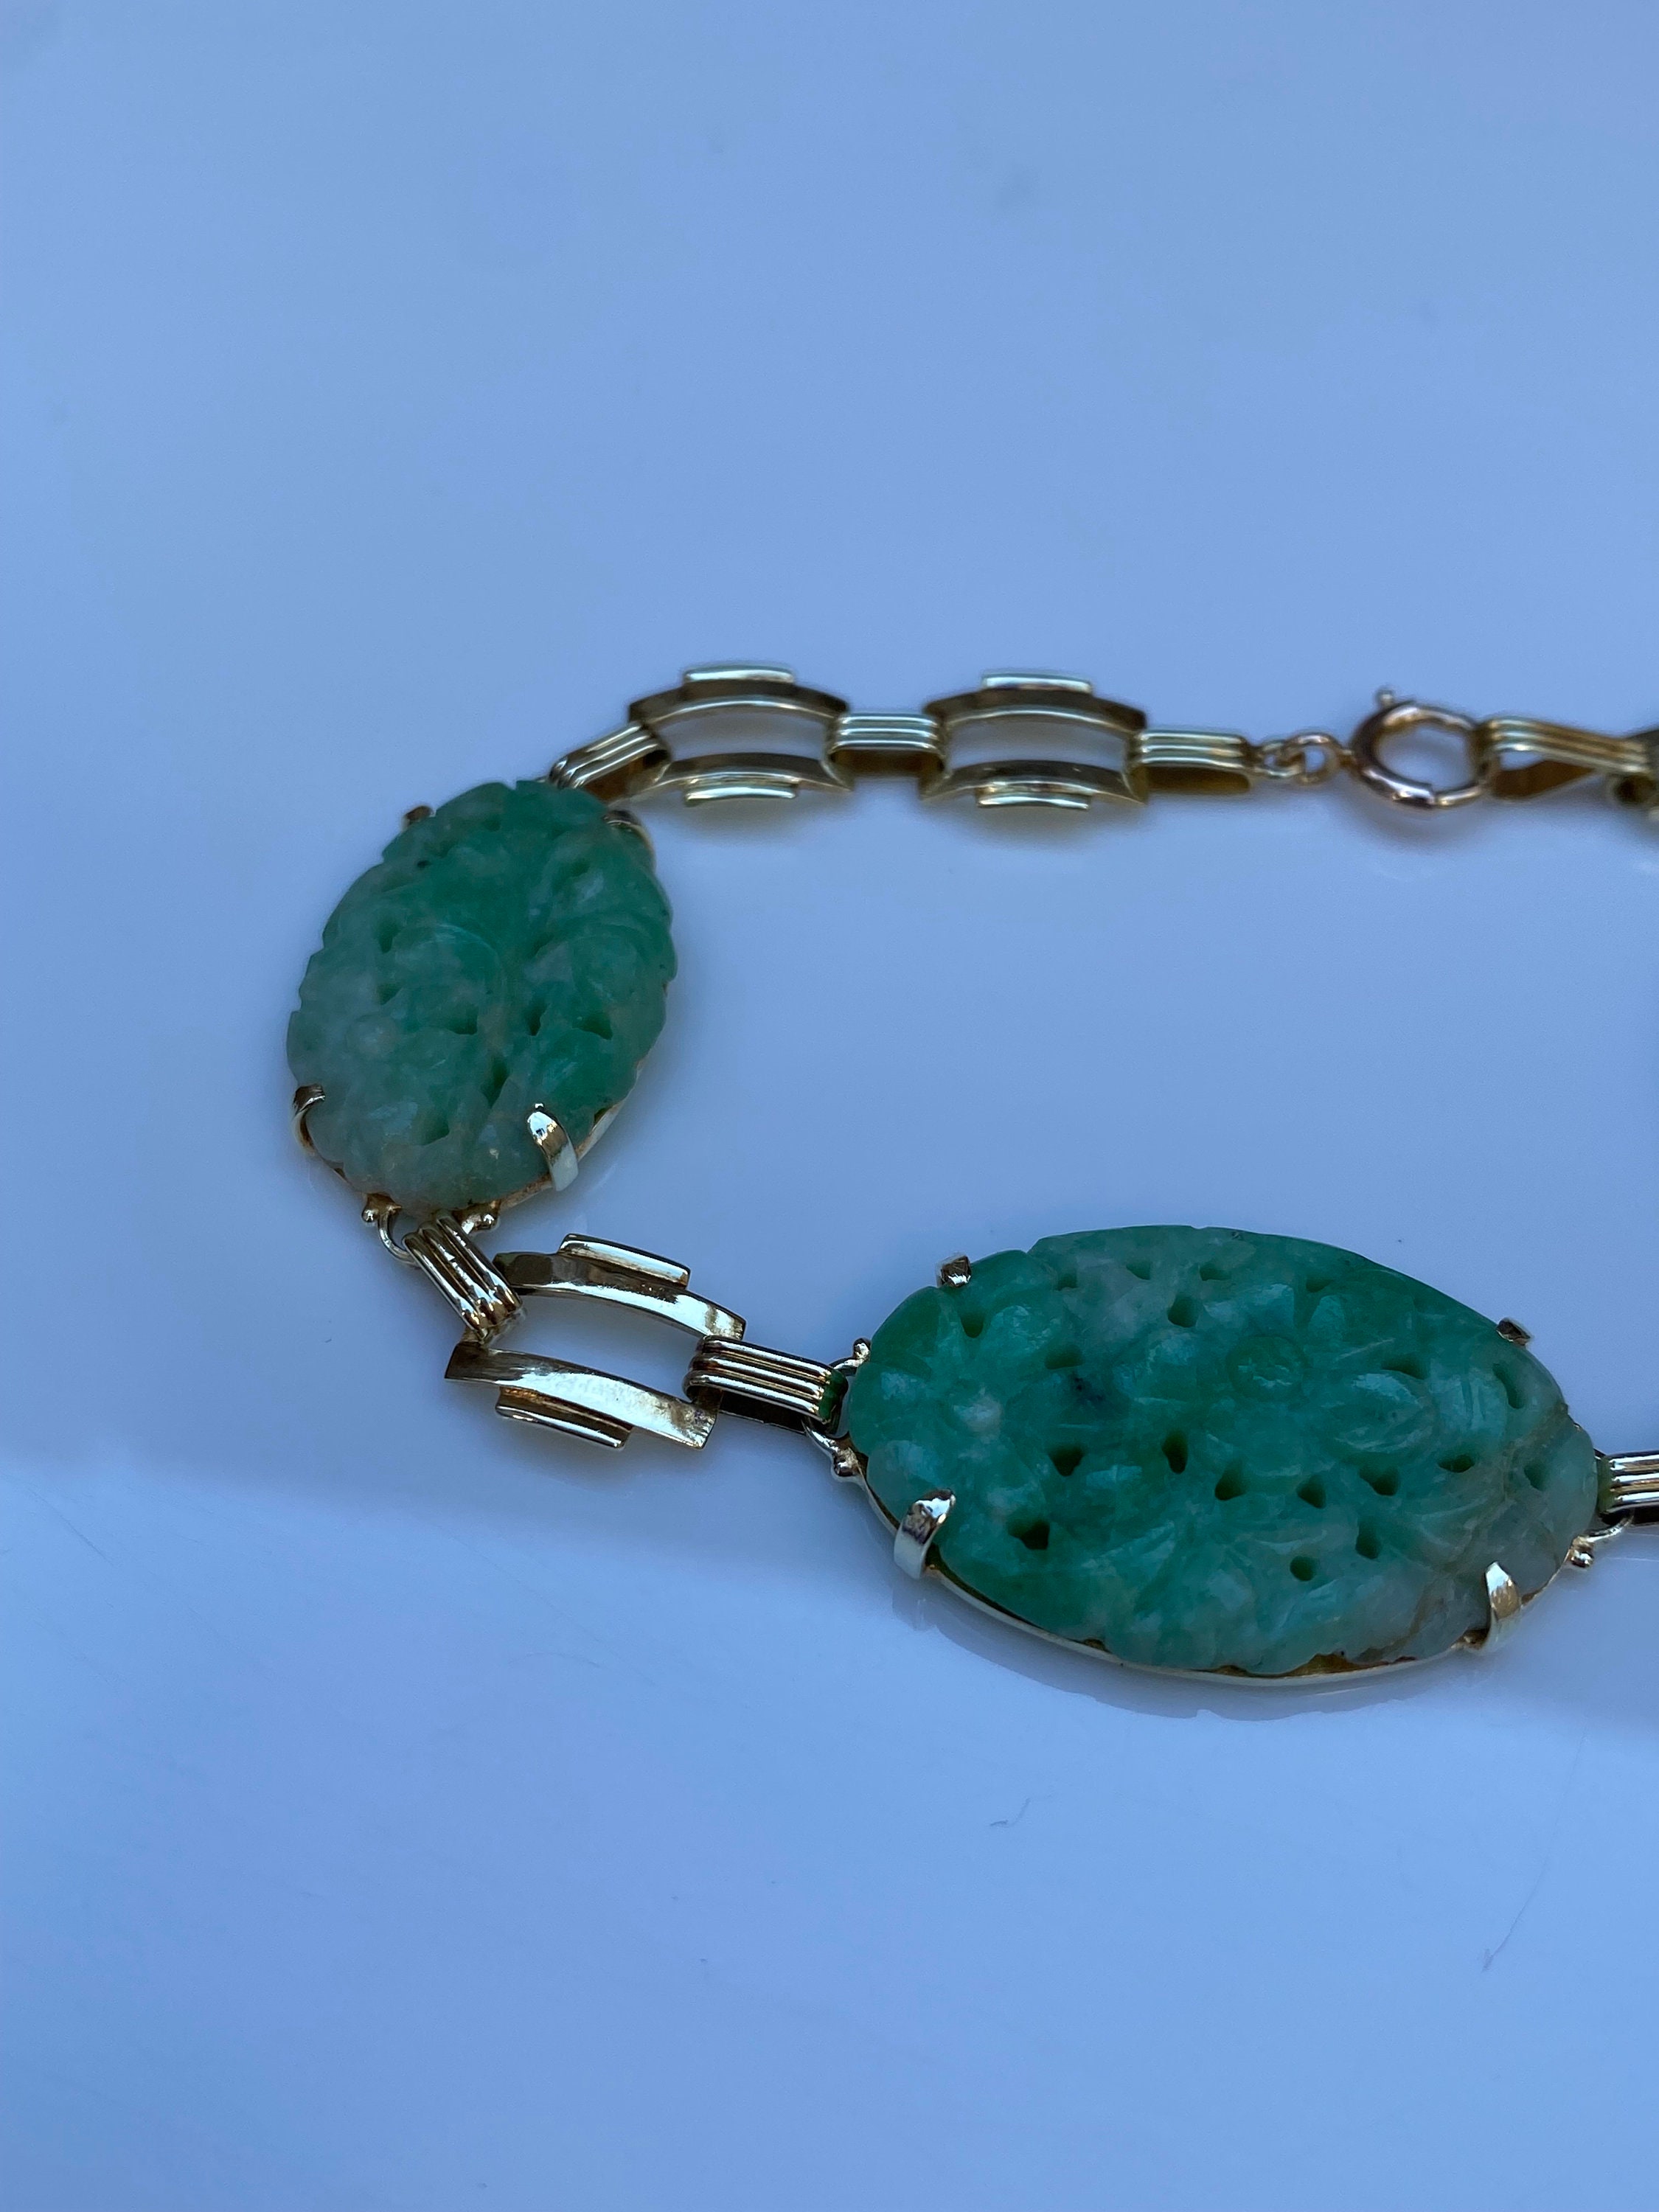 Best Vintage Gold Bracelet with Jade Jewelry Gift